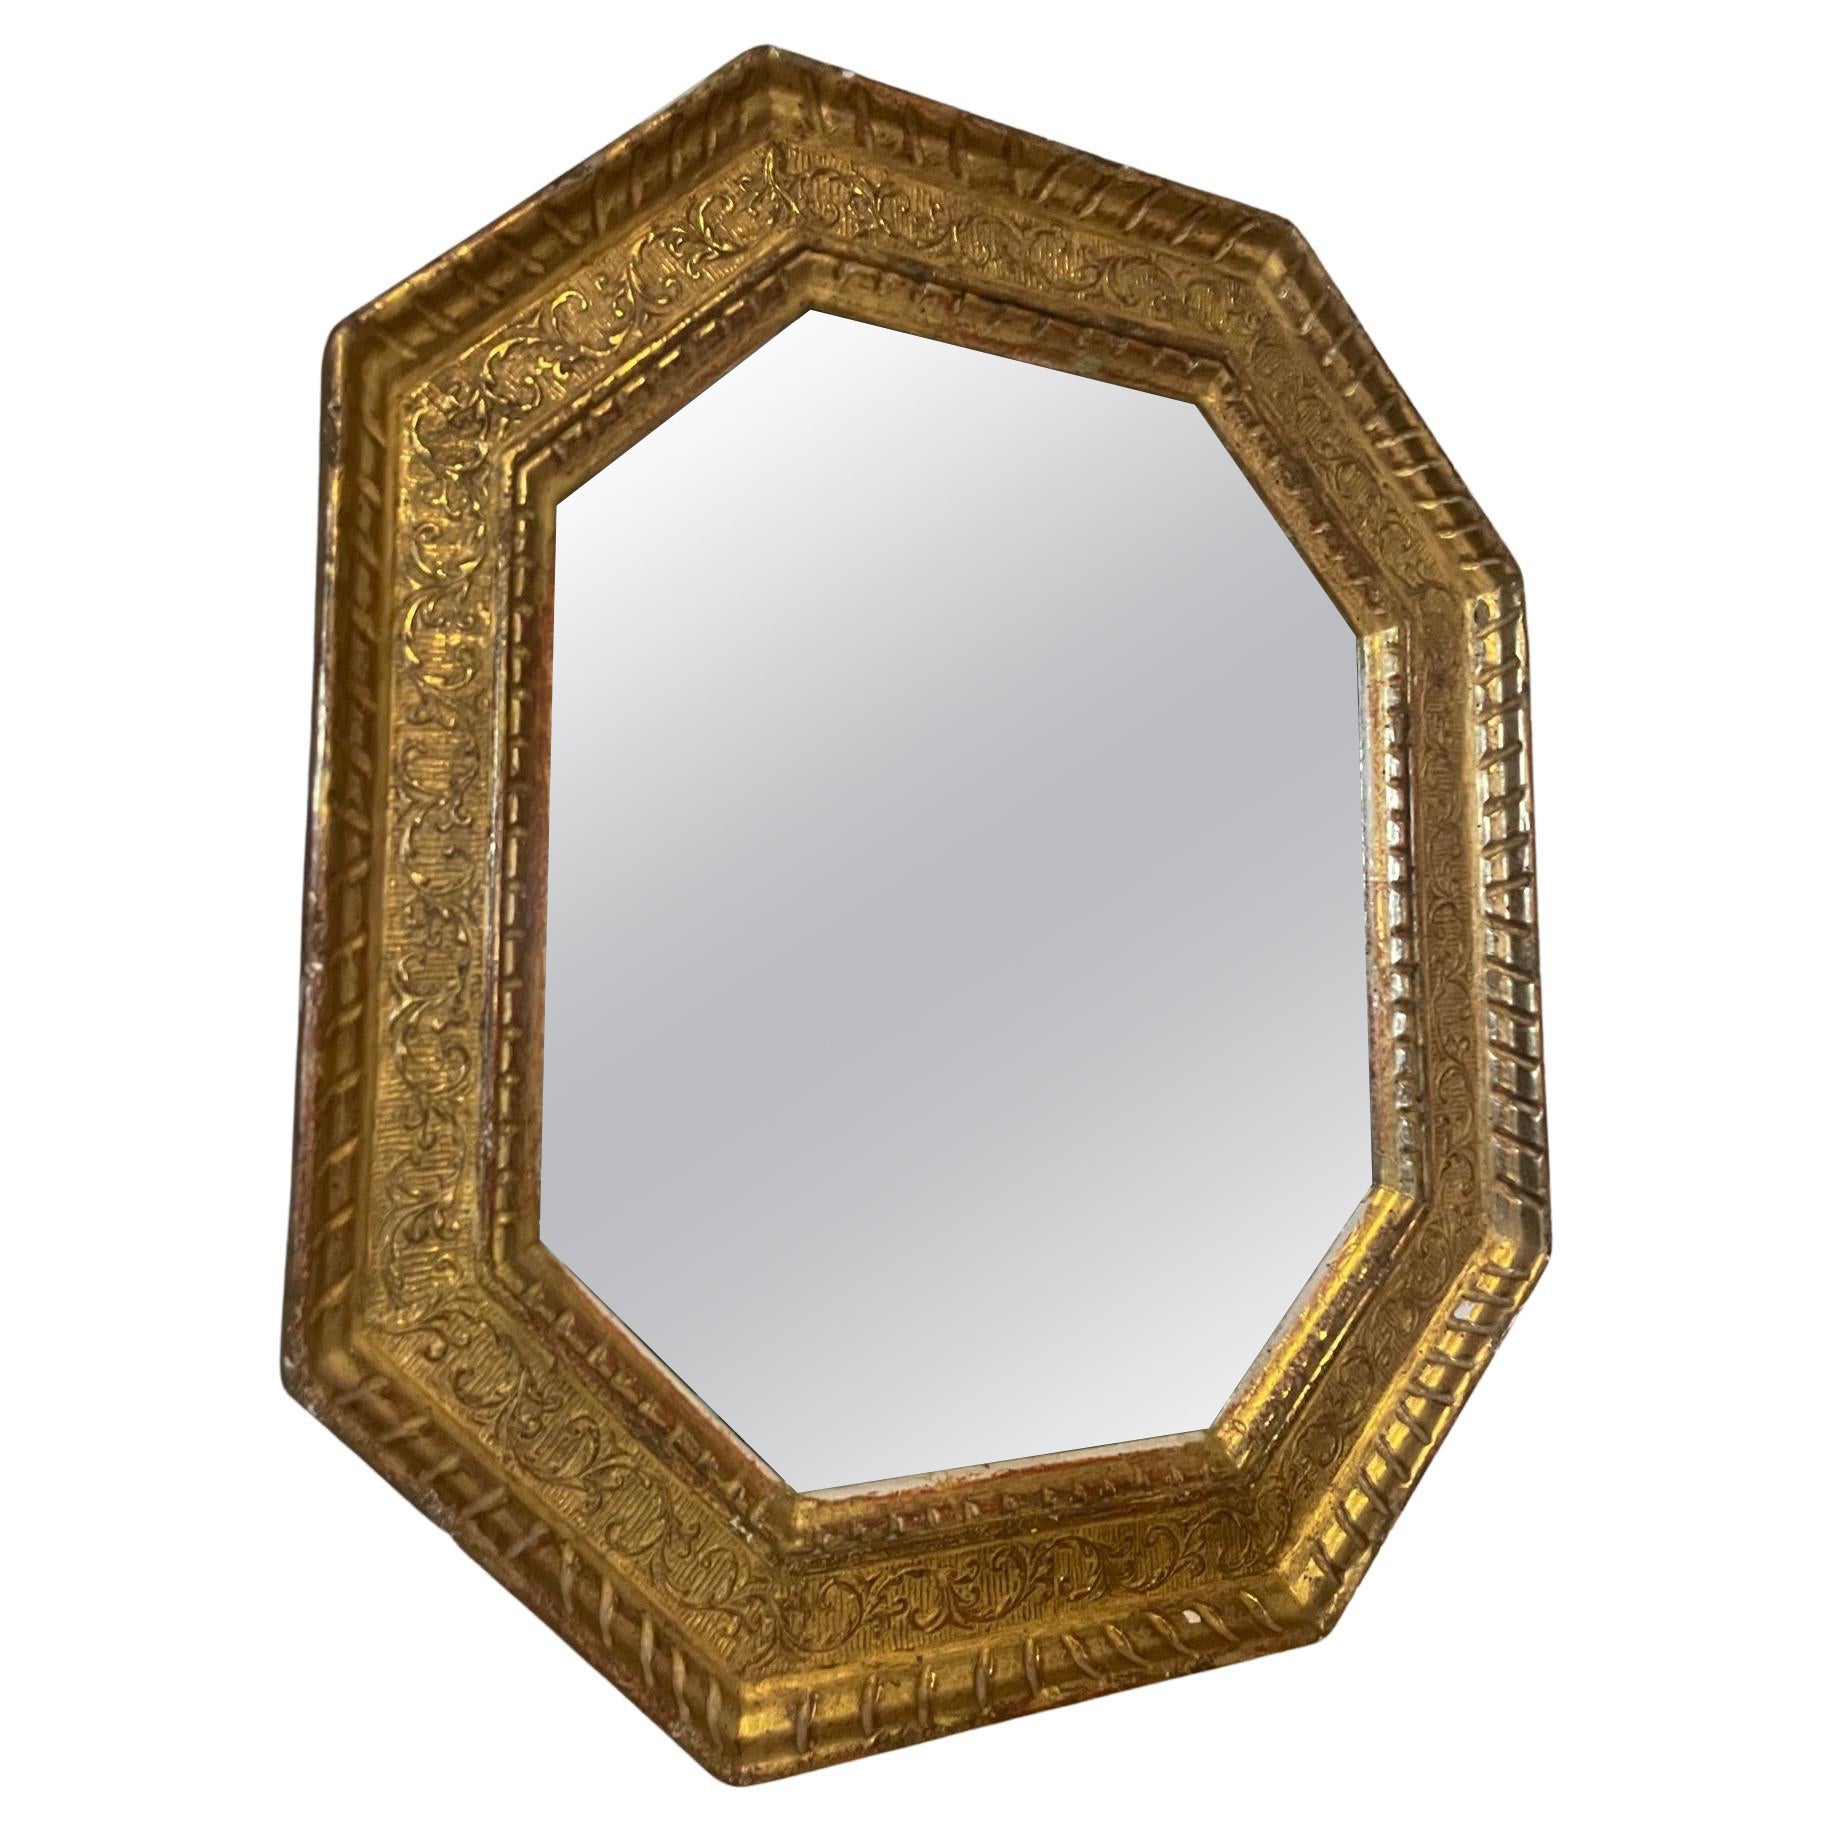 20th century French Golden Wood Octogonal Mirror, 1950s For Sale